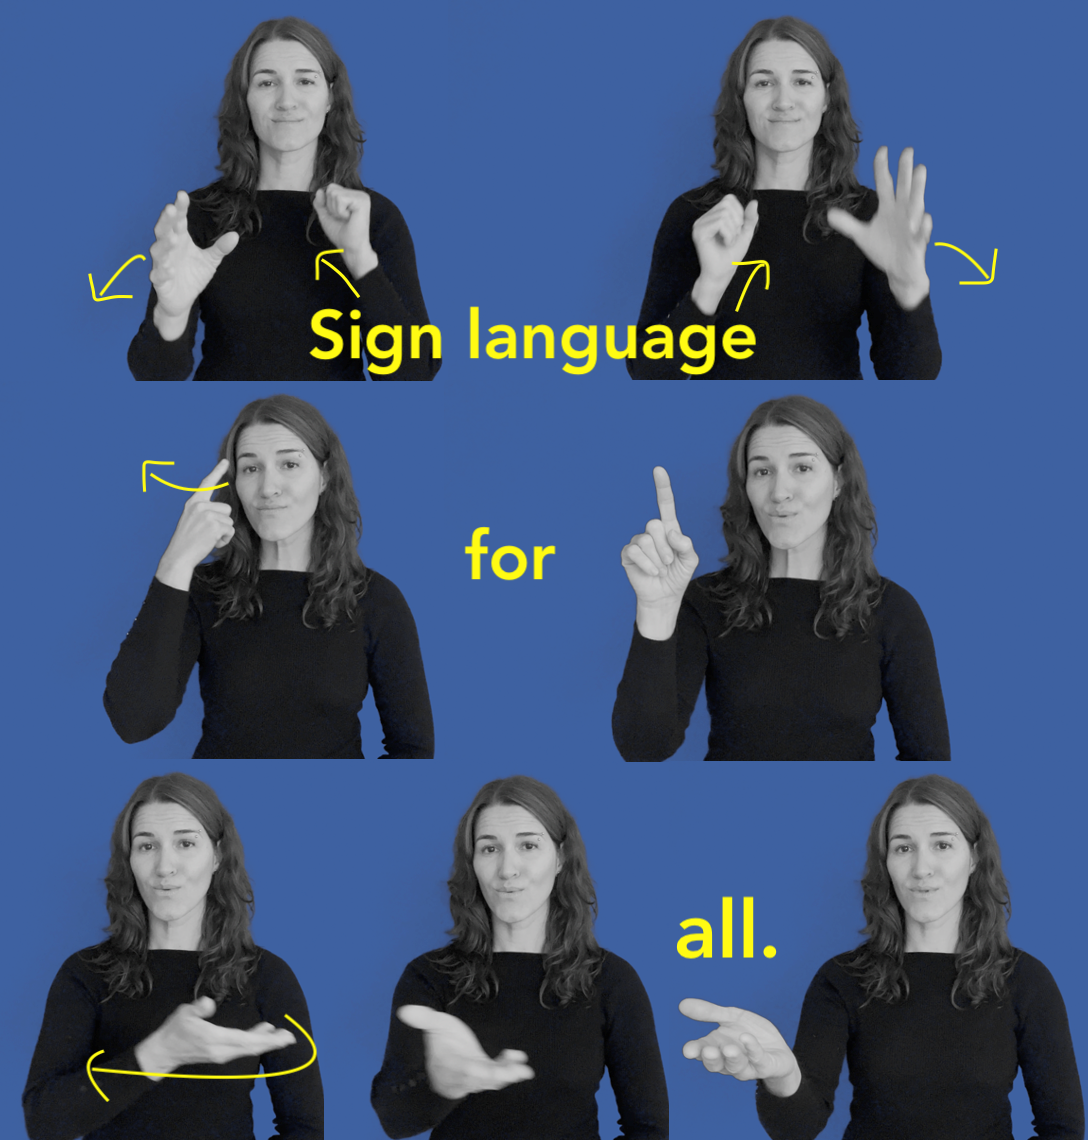 Sign Language for All!  Close up of a sign language interpreter with long hair demonstrates with her two hands and body language how to sign the words "Sign language for all" in three steps.